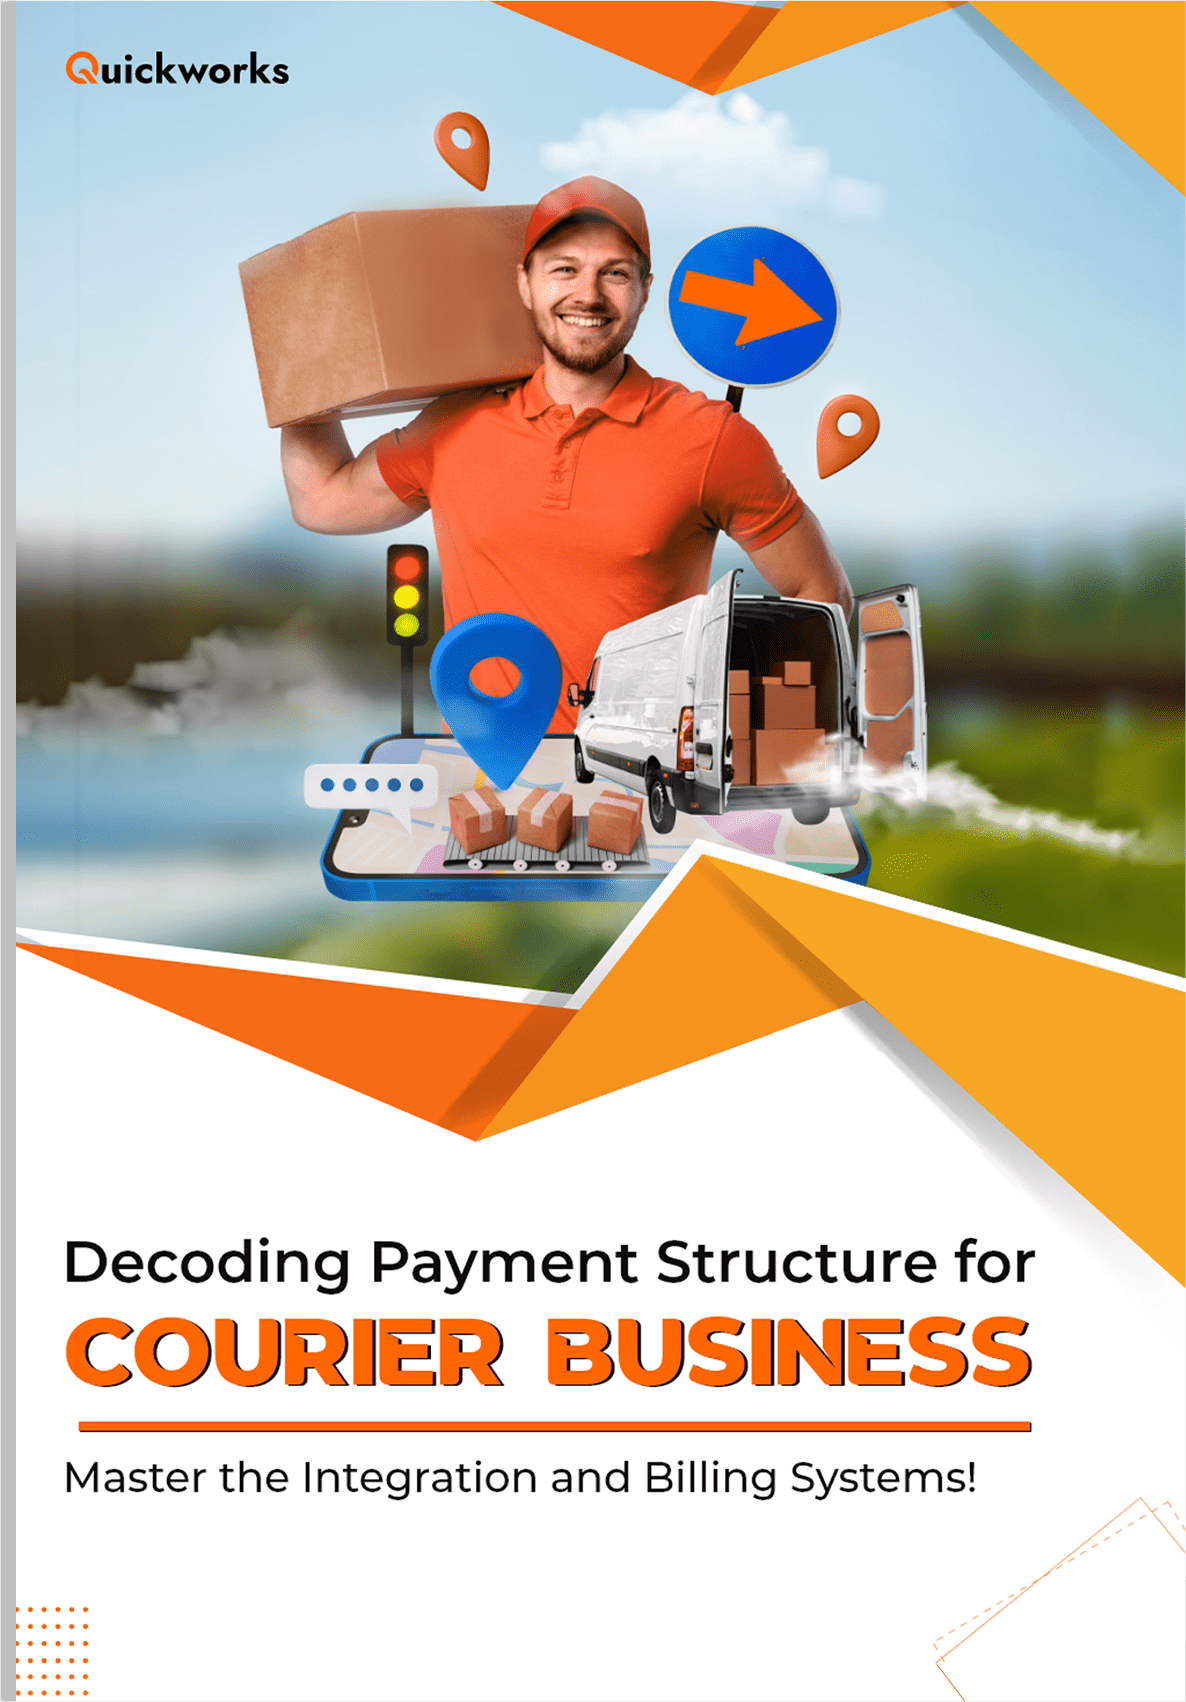 Decoding Payment Structure for Courier Business